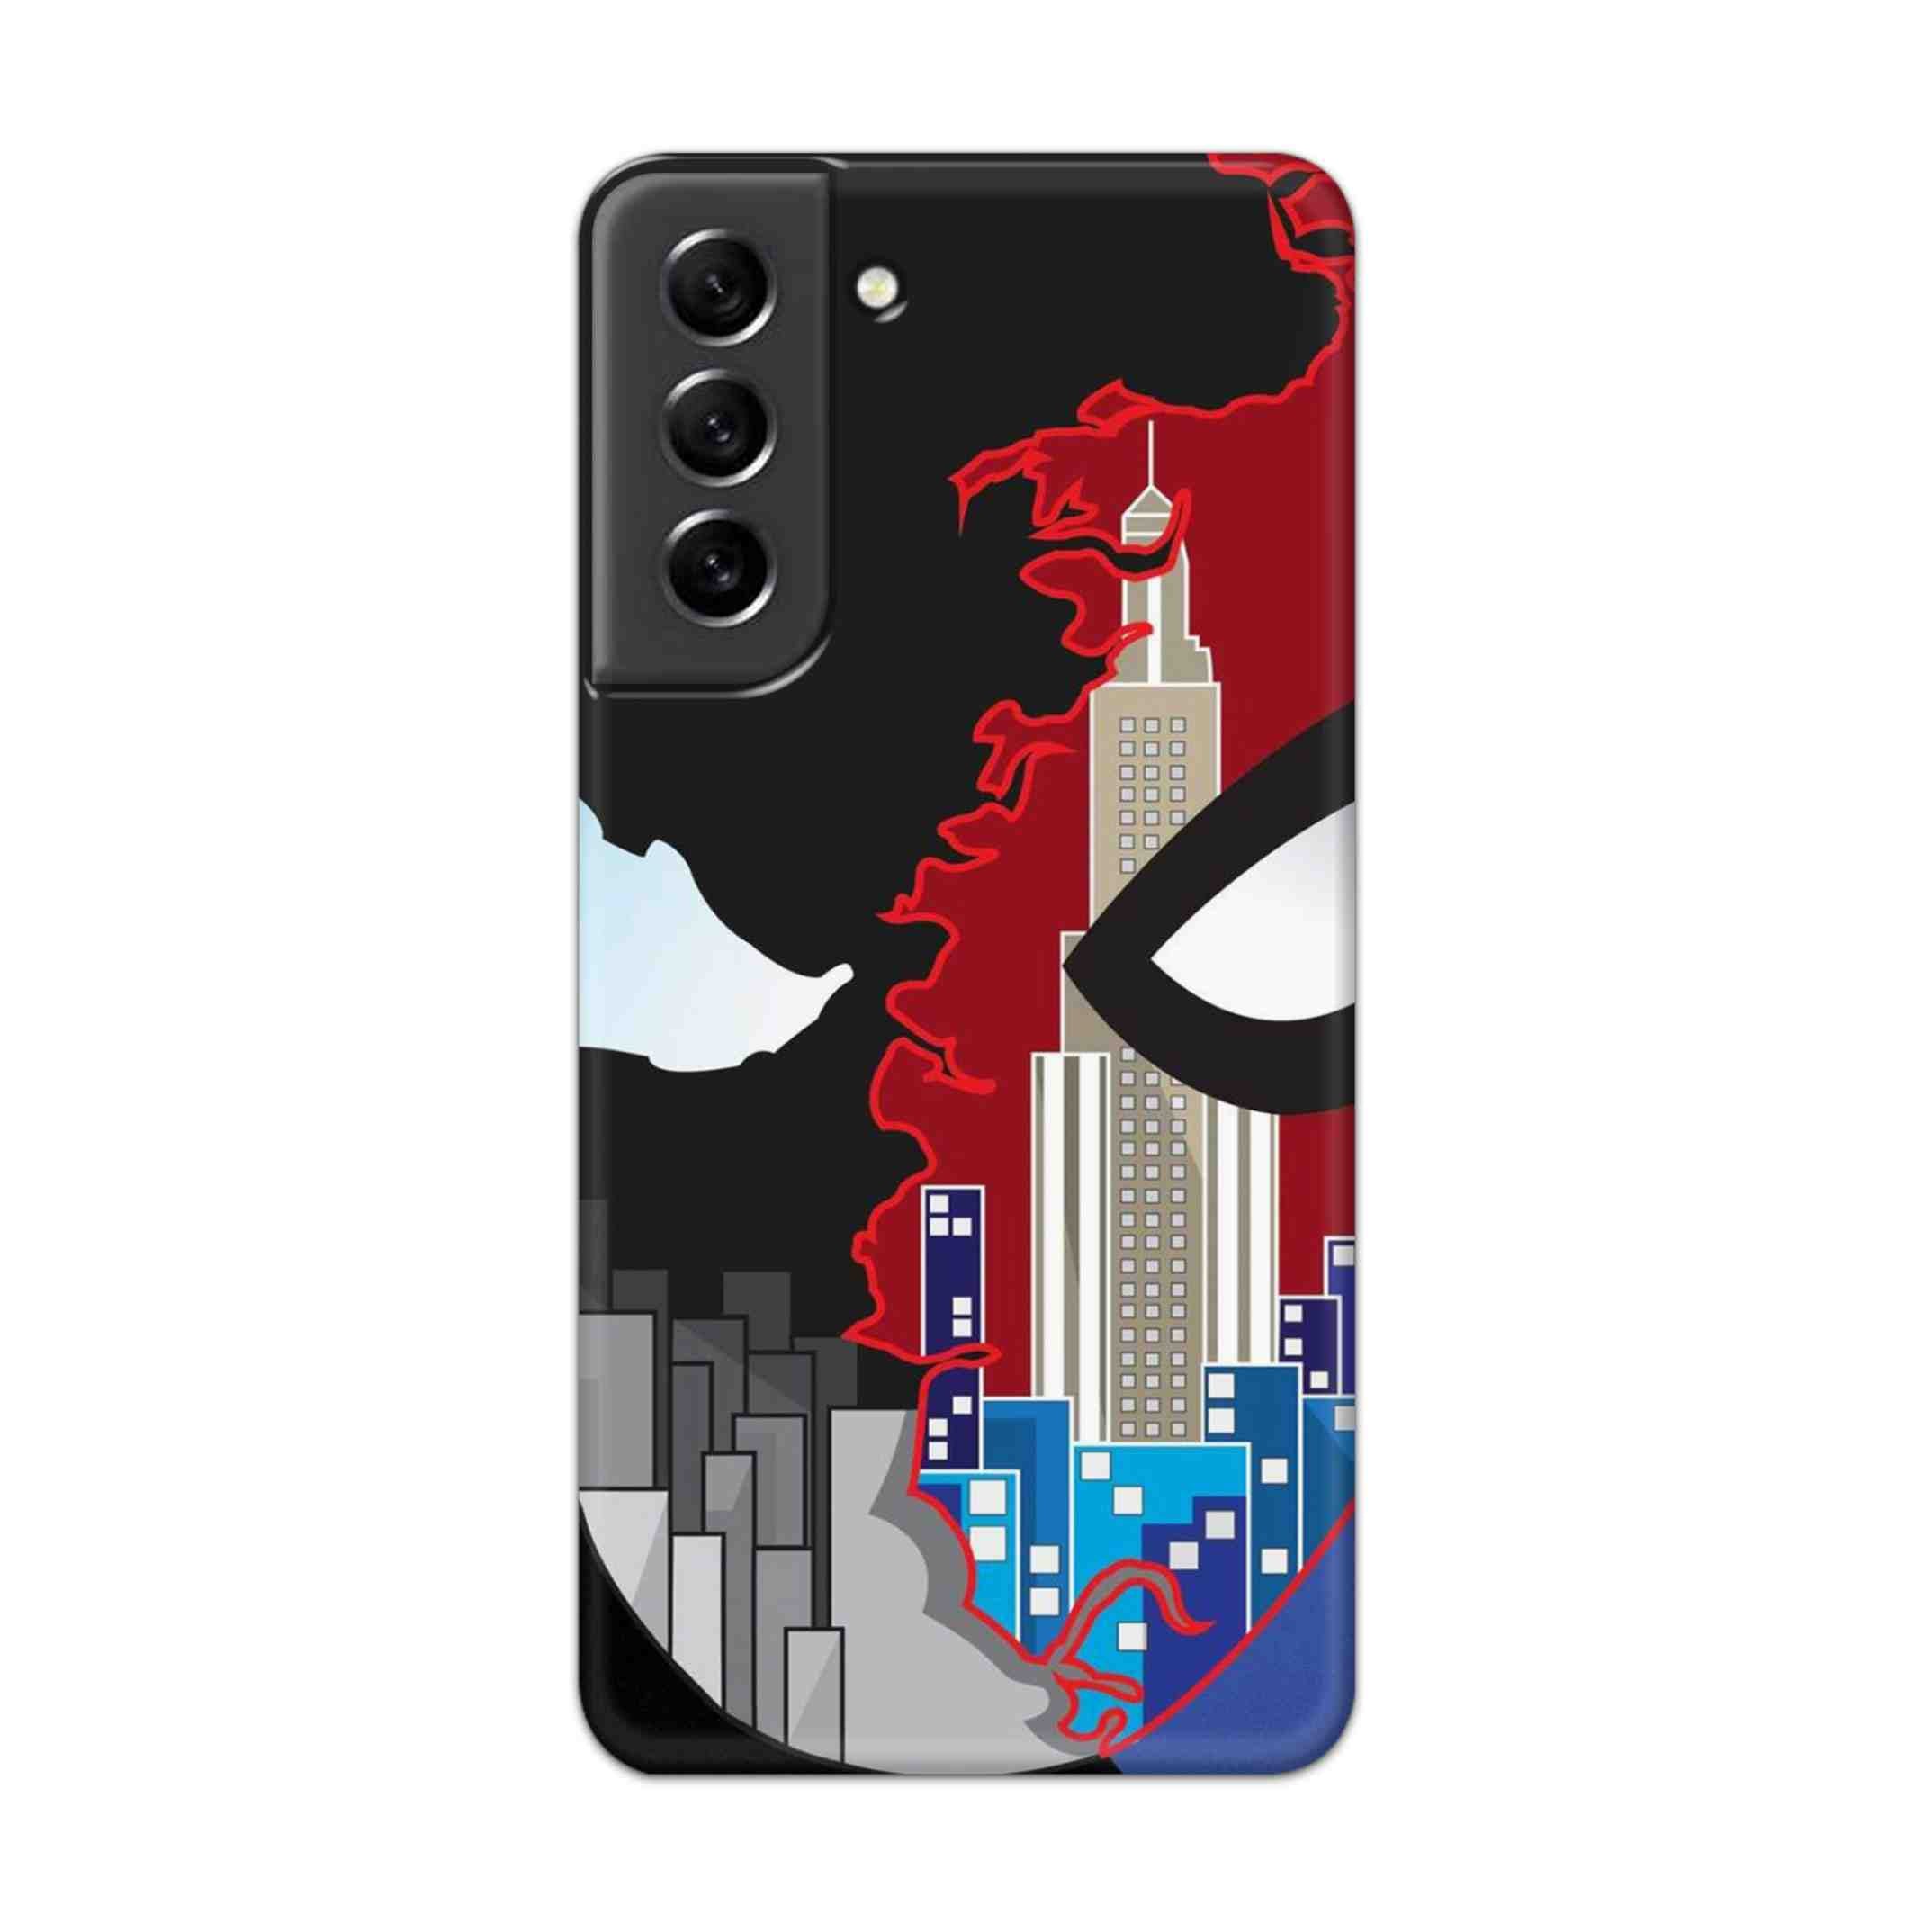 Buy Red And Black Spiderman Hard Back Mobile Phone Case Cover For Samsung S21 FE Online